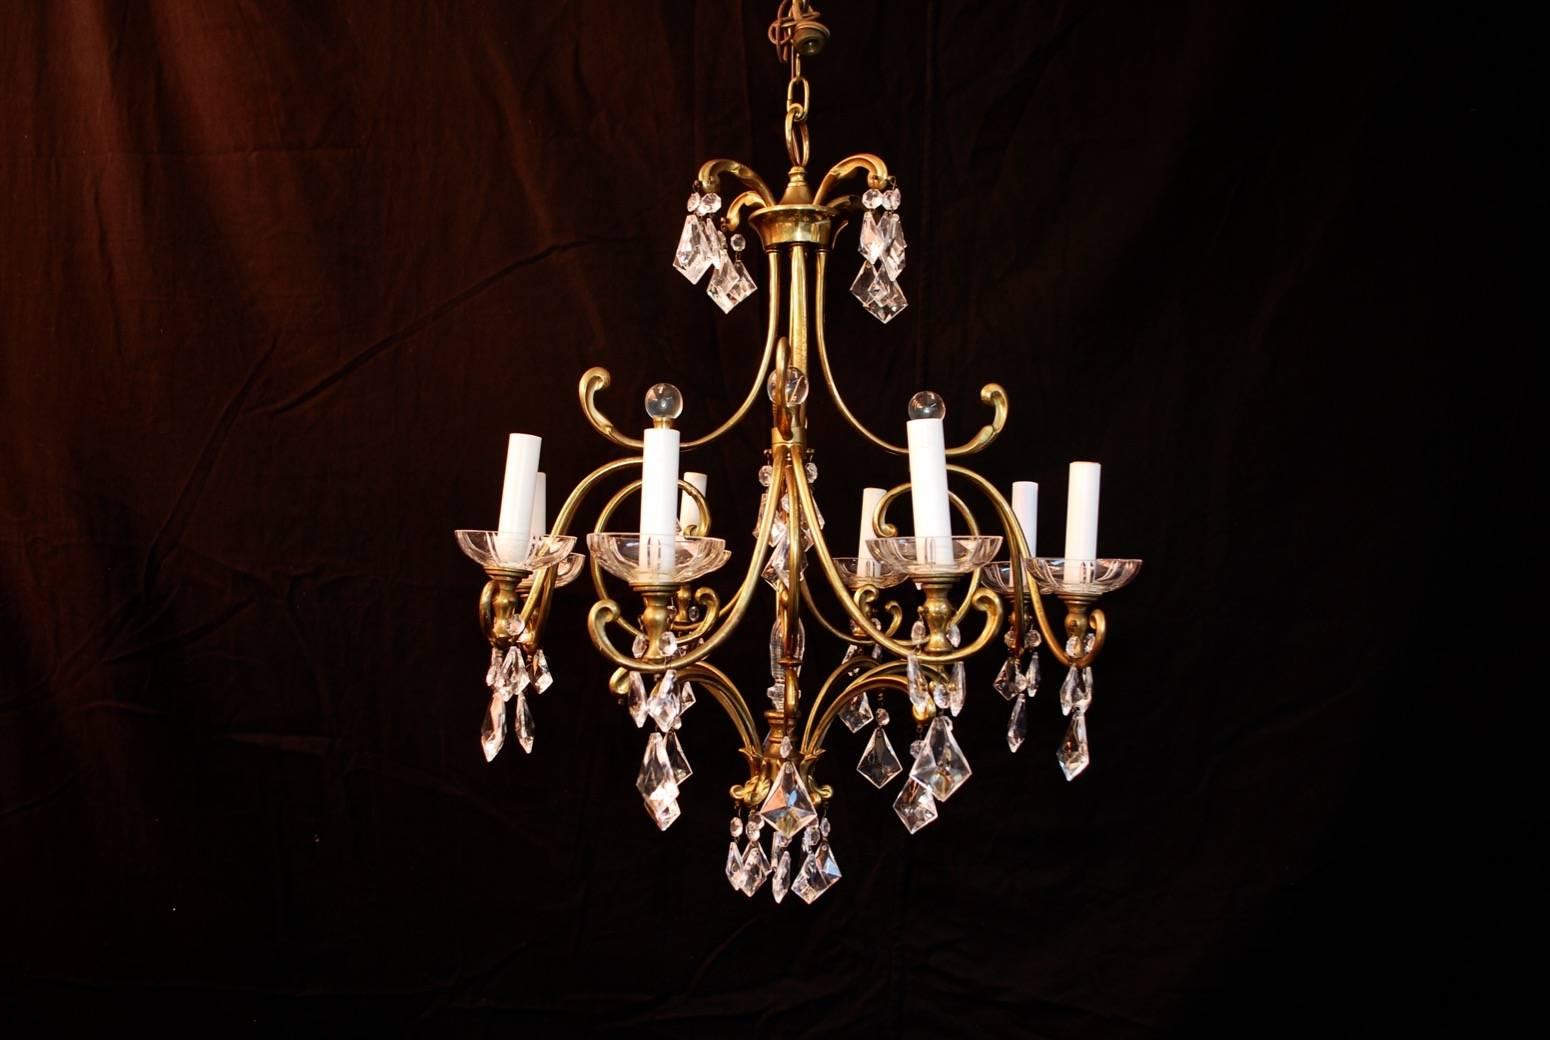 We have over 3,000 antique sconces and over 1,000 antique lights, if you need a specific pair of sconces or lights use the contact dealer button to ask us, we might have it in our store.
We also have our own line of wrought iron reproduction